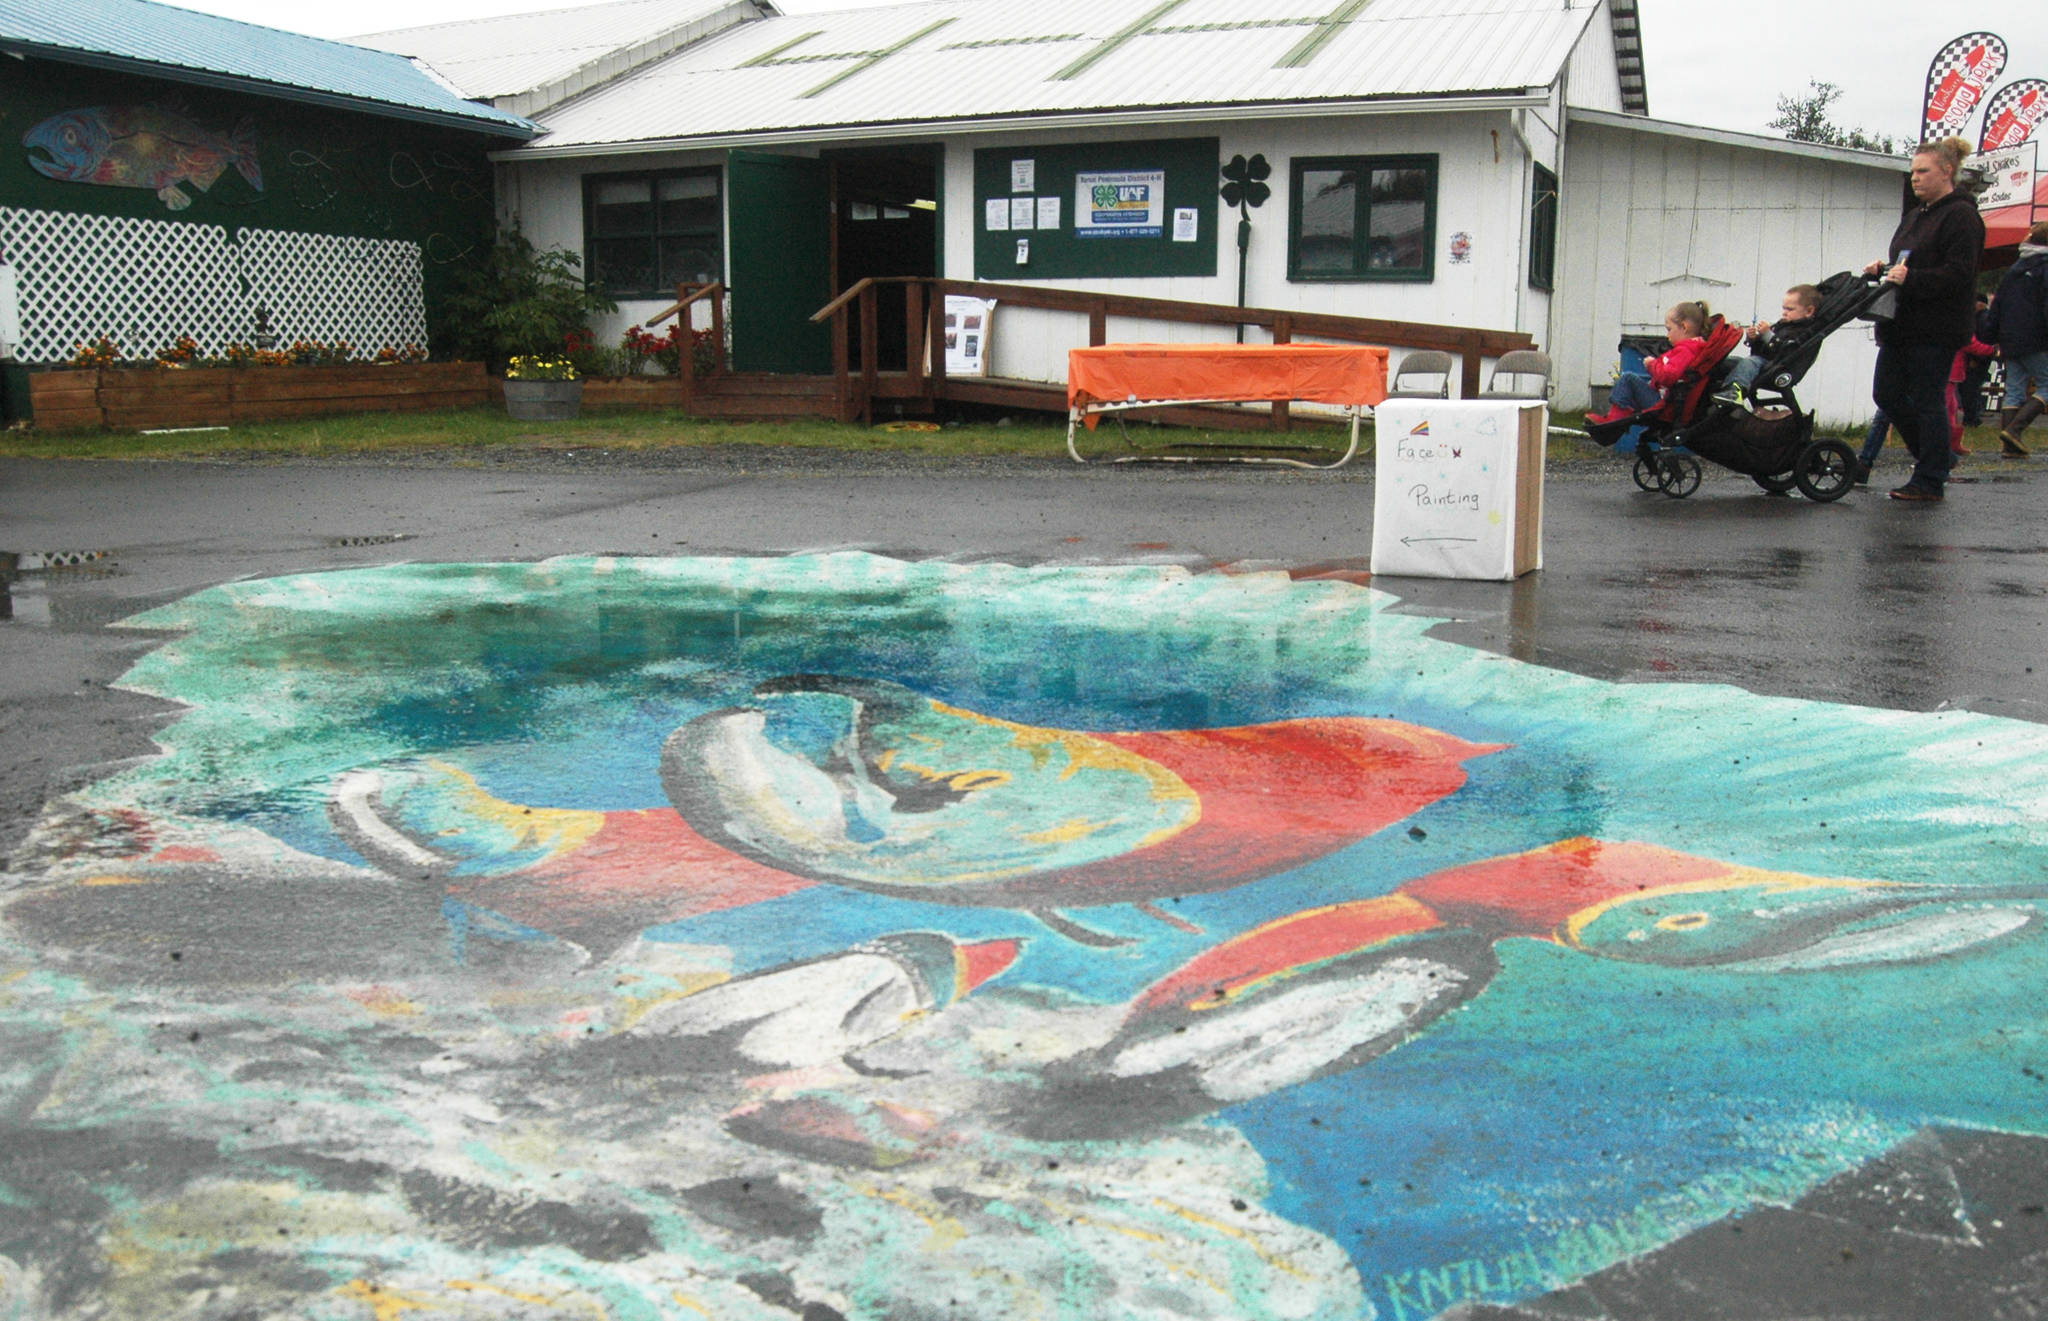 A mural decorates the pavement at the Kenai Peninsula Fairgrounds at the fair on Saturday, Aug. 18, 2018 in Ninilchik, Alaska. (Photo by Elizabeth Earl/Peninsula Clarion)